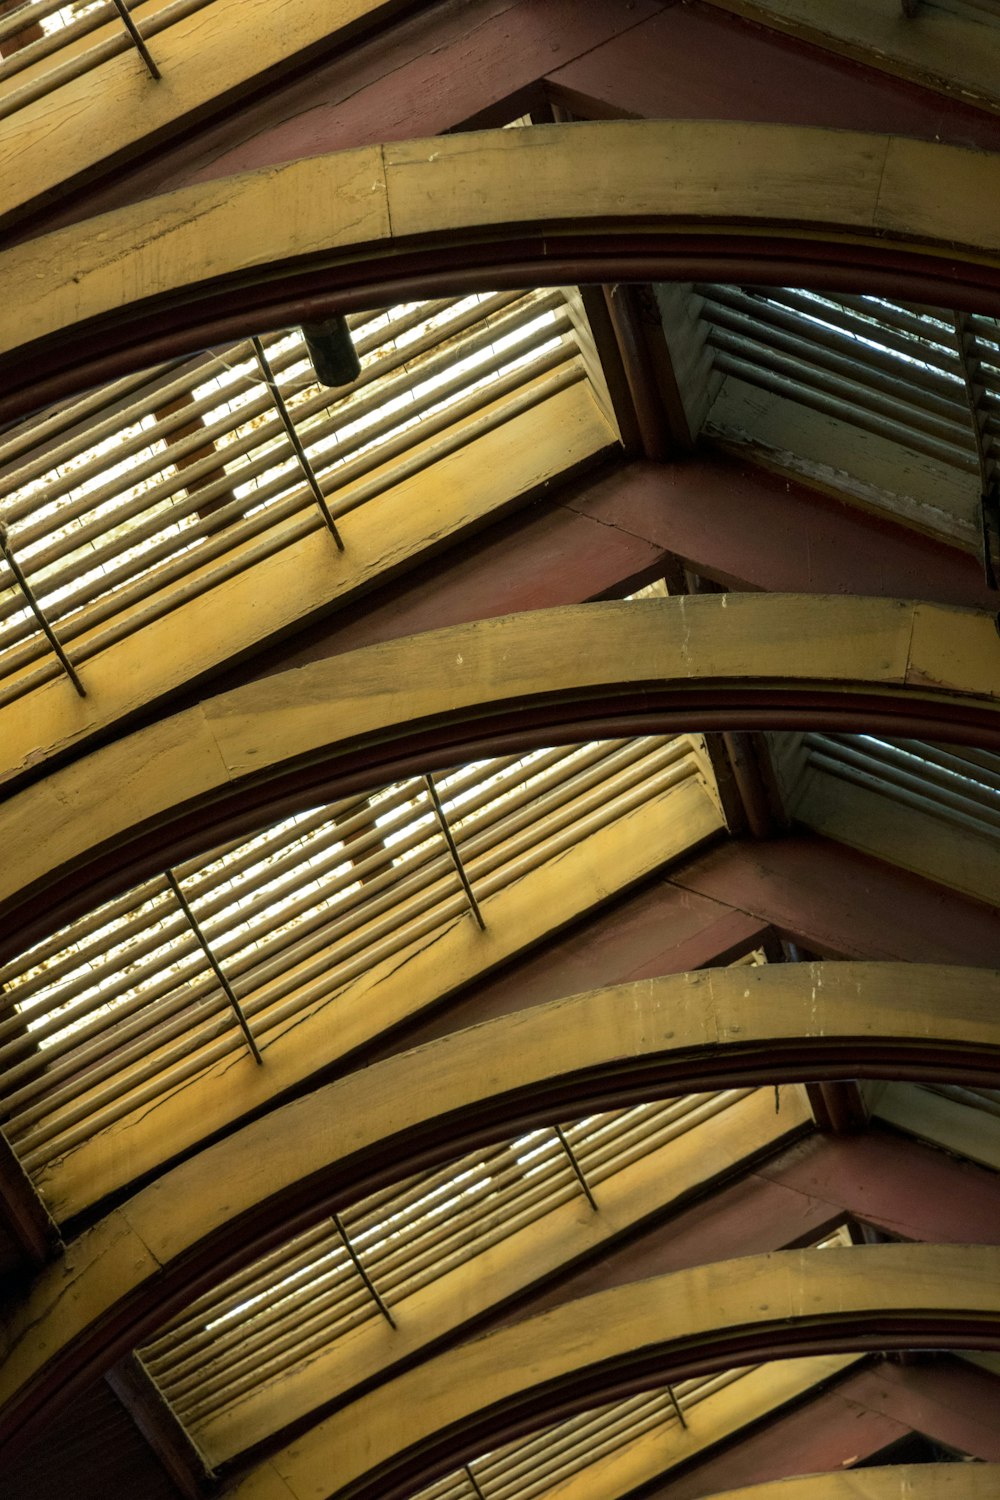 a view of the ceiling of a train station